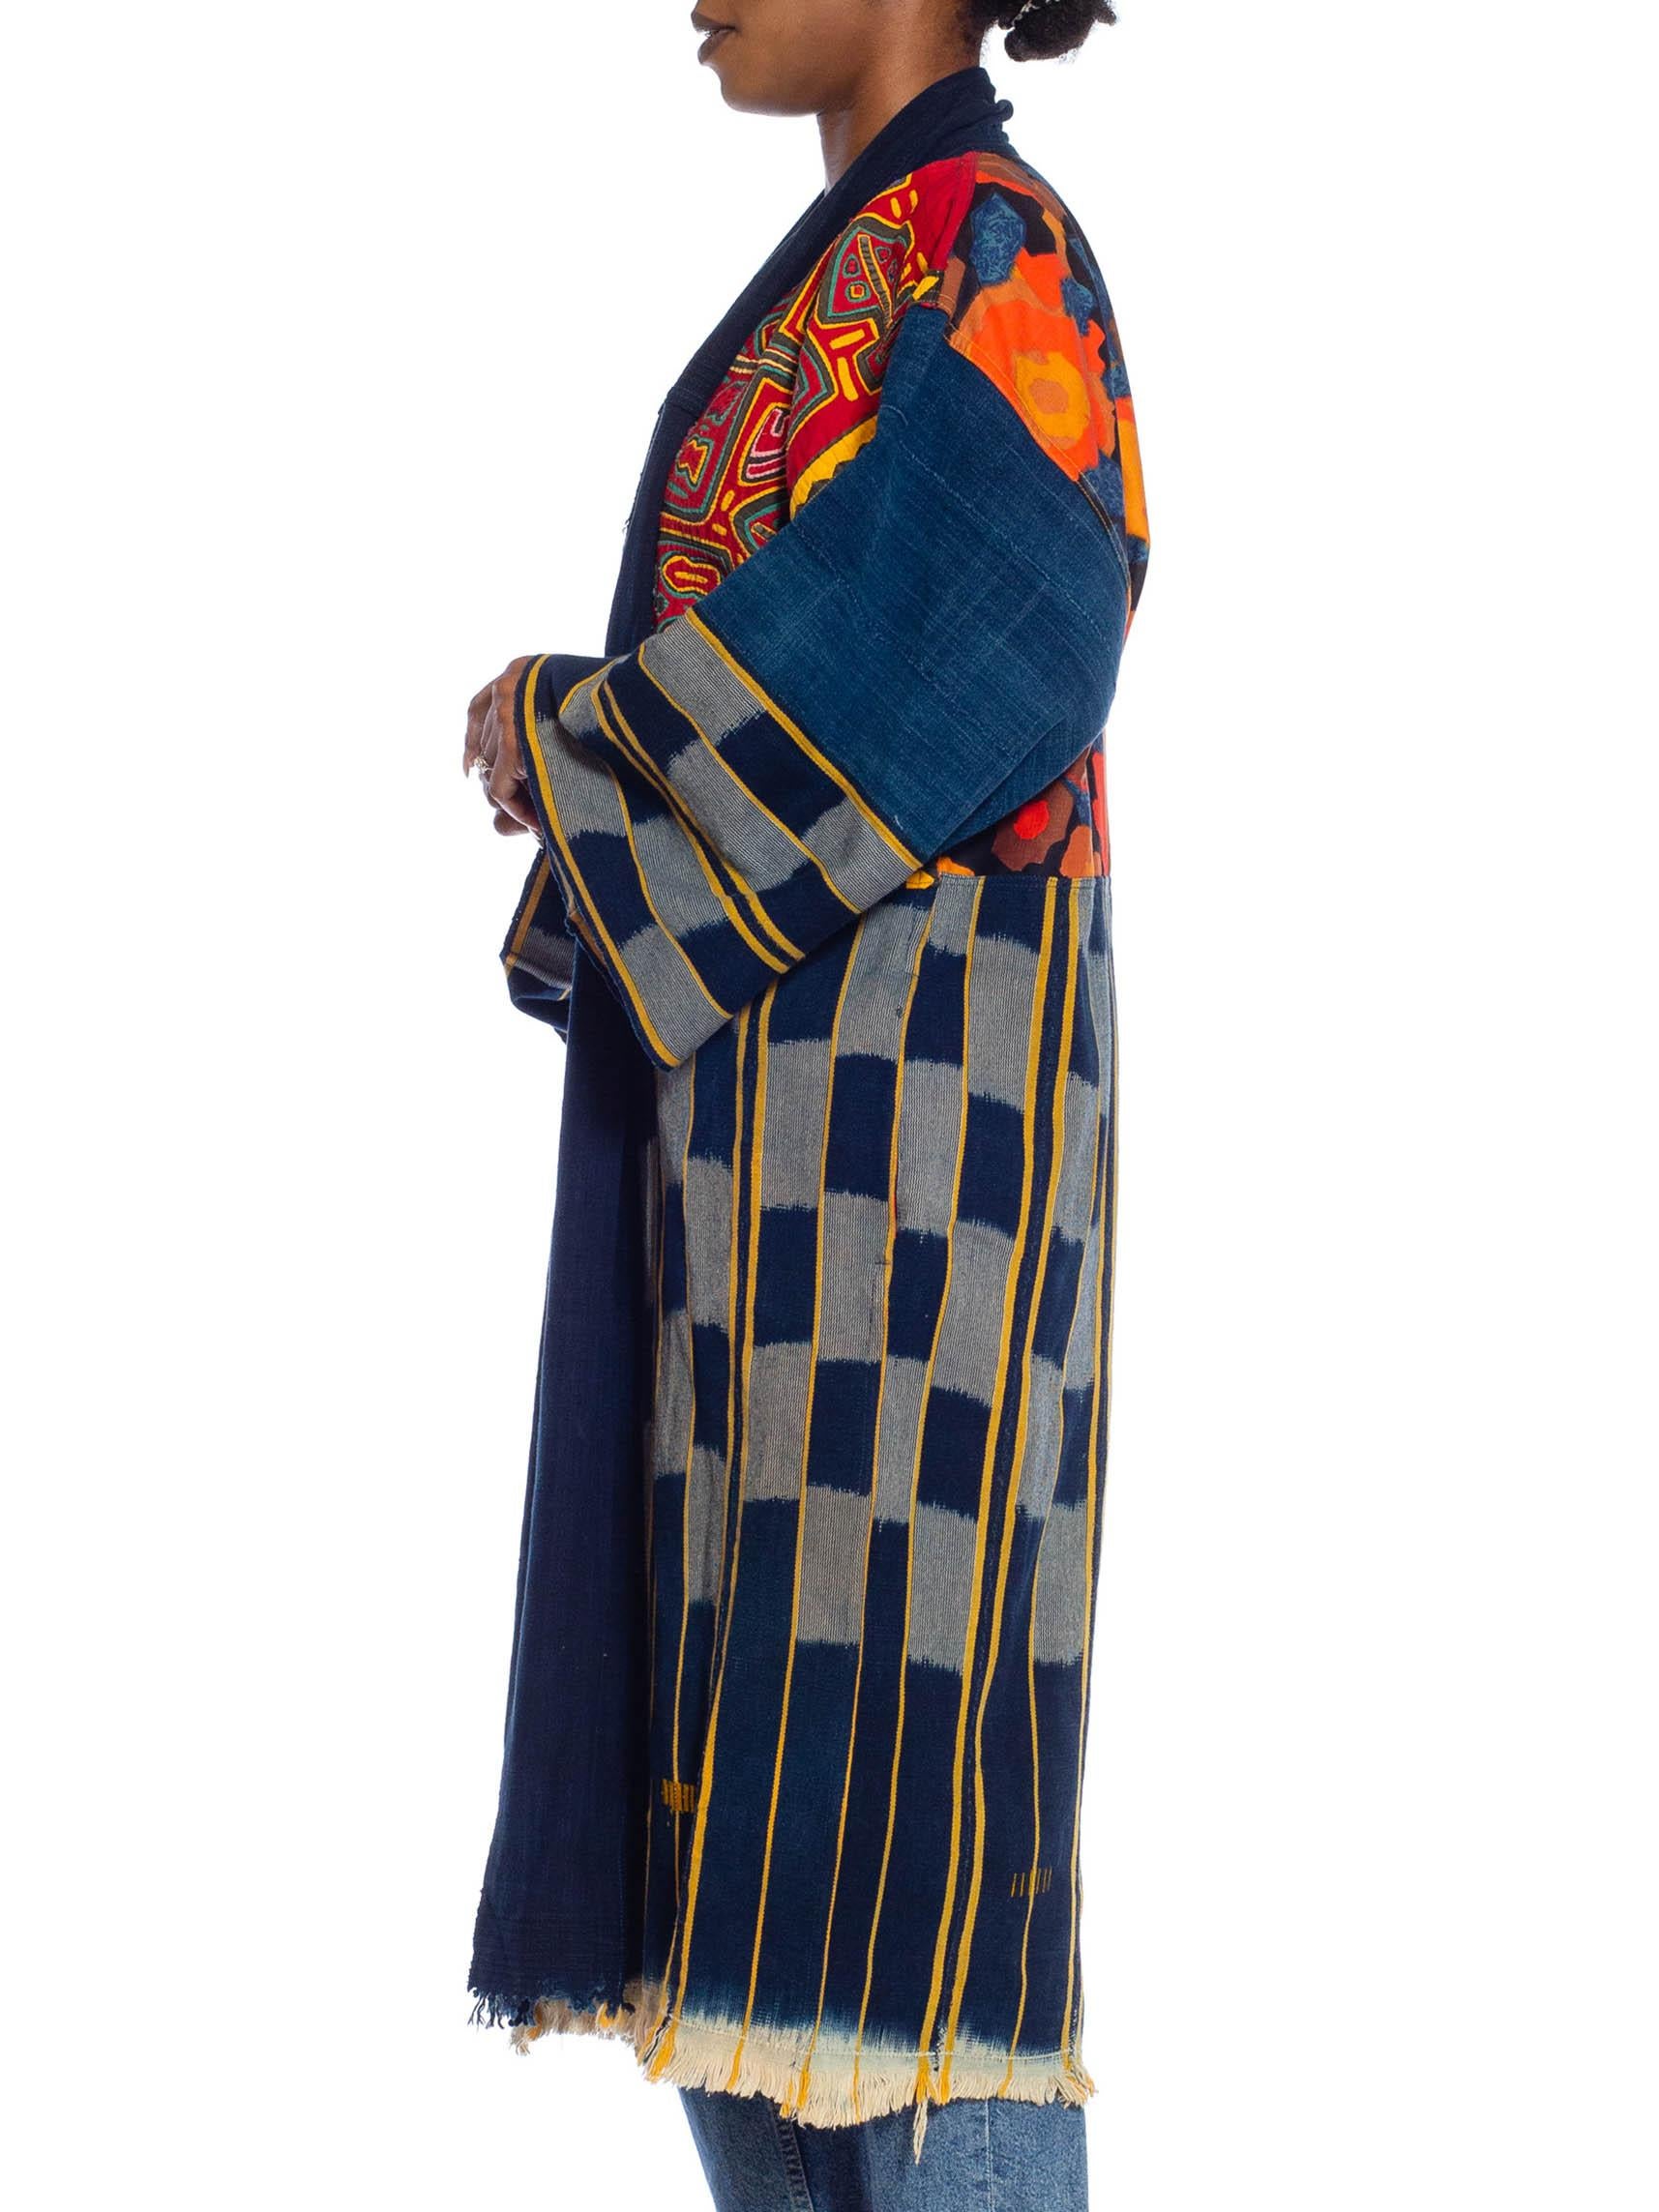 Made from up-cycled vintage fabrics so there are a few areas showing patinated wear. MORPHEW COLLECTION Navy Blue, Red & Orange African Cotton Indigo Duster With Central American Hand Appliqué Work 
MORPHEW COLLECTION is made entirely by hand in our